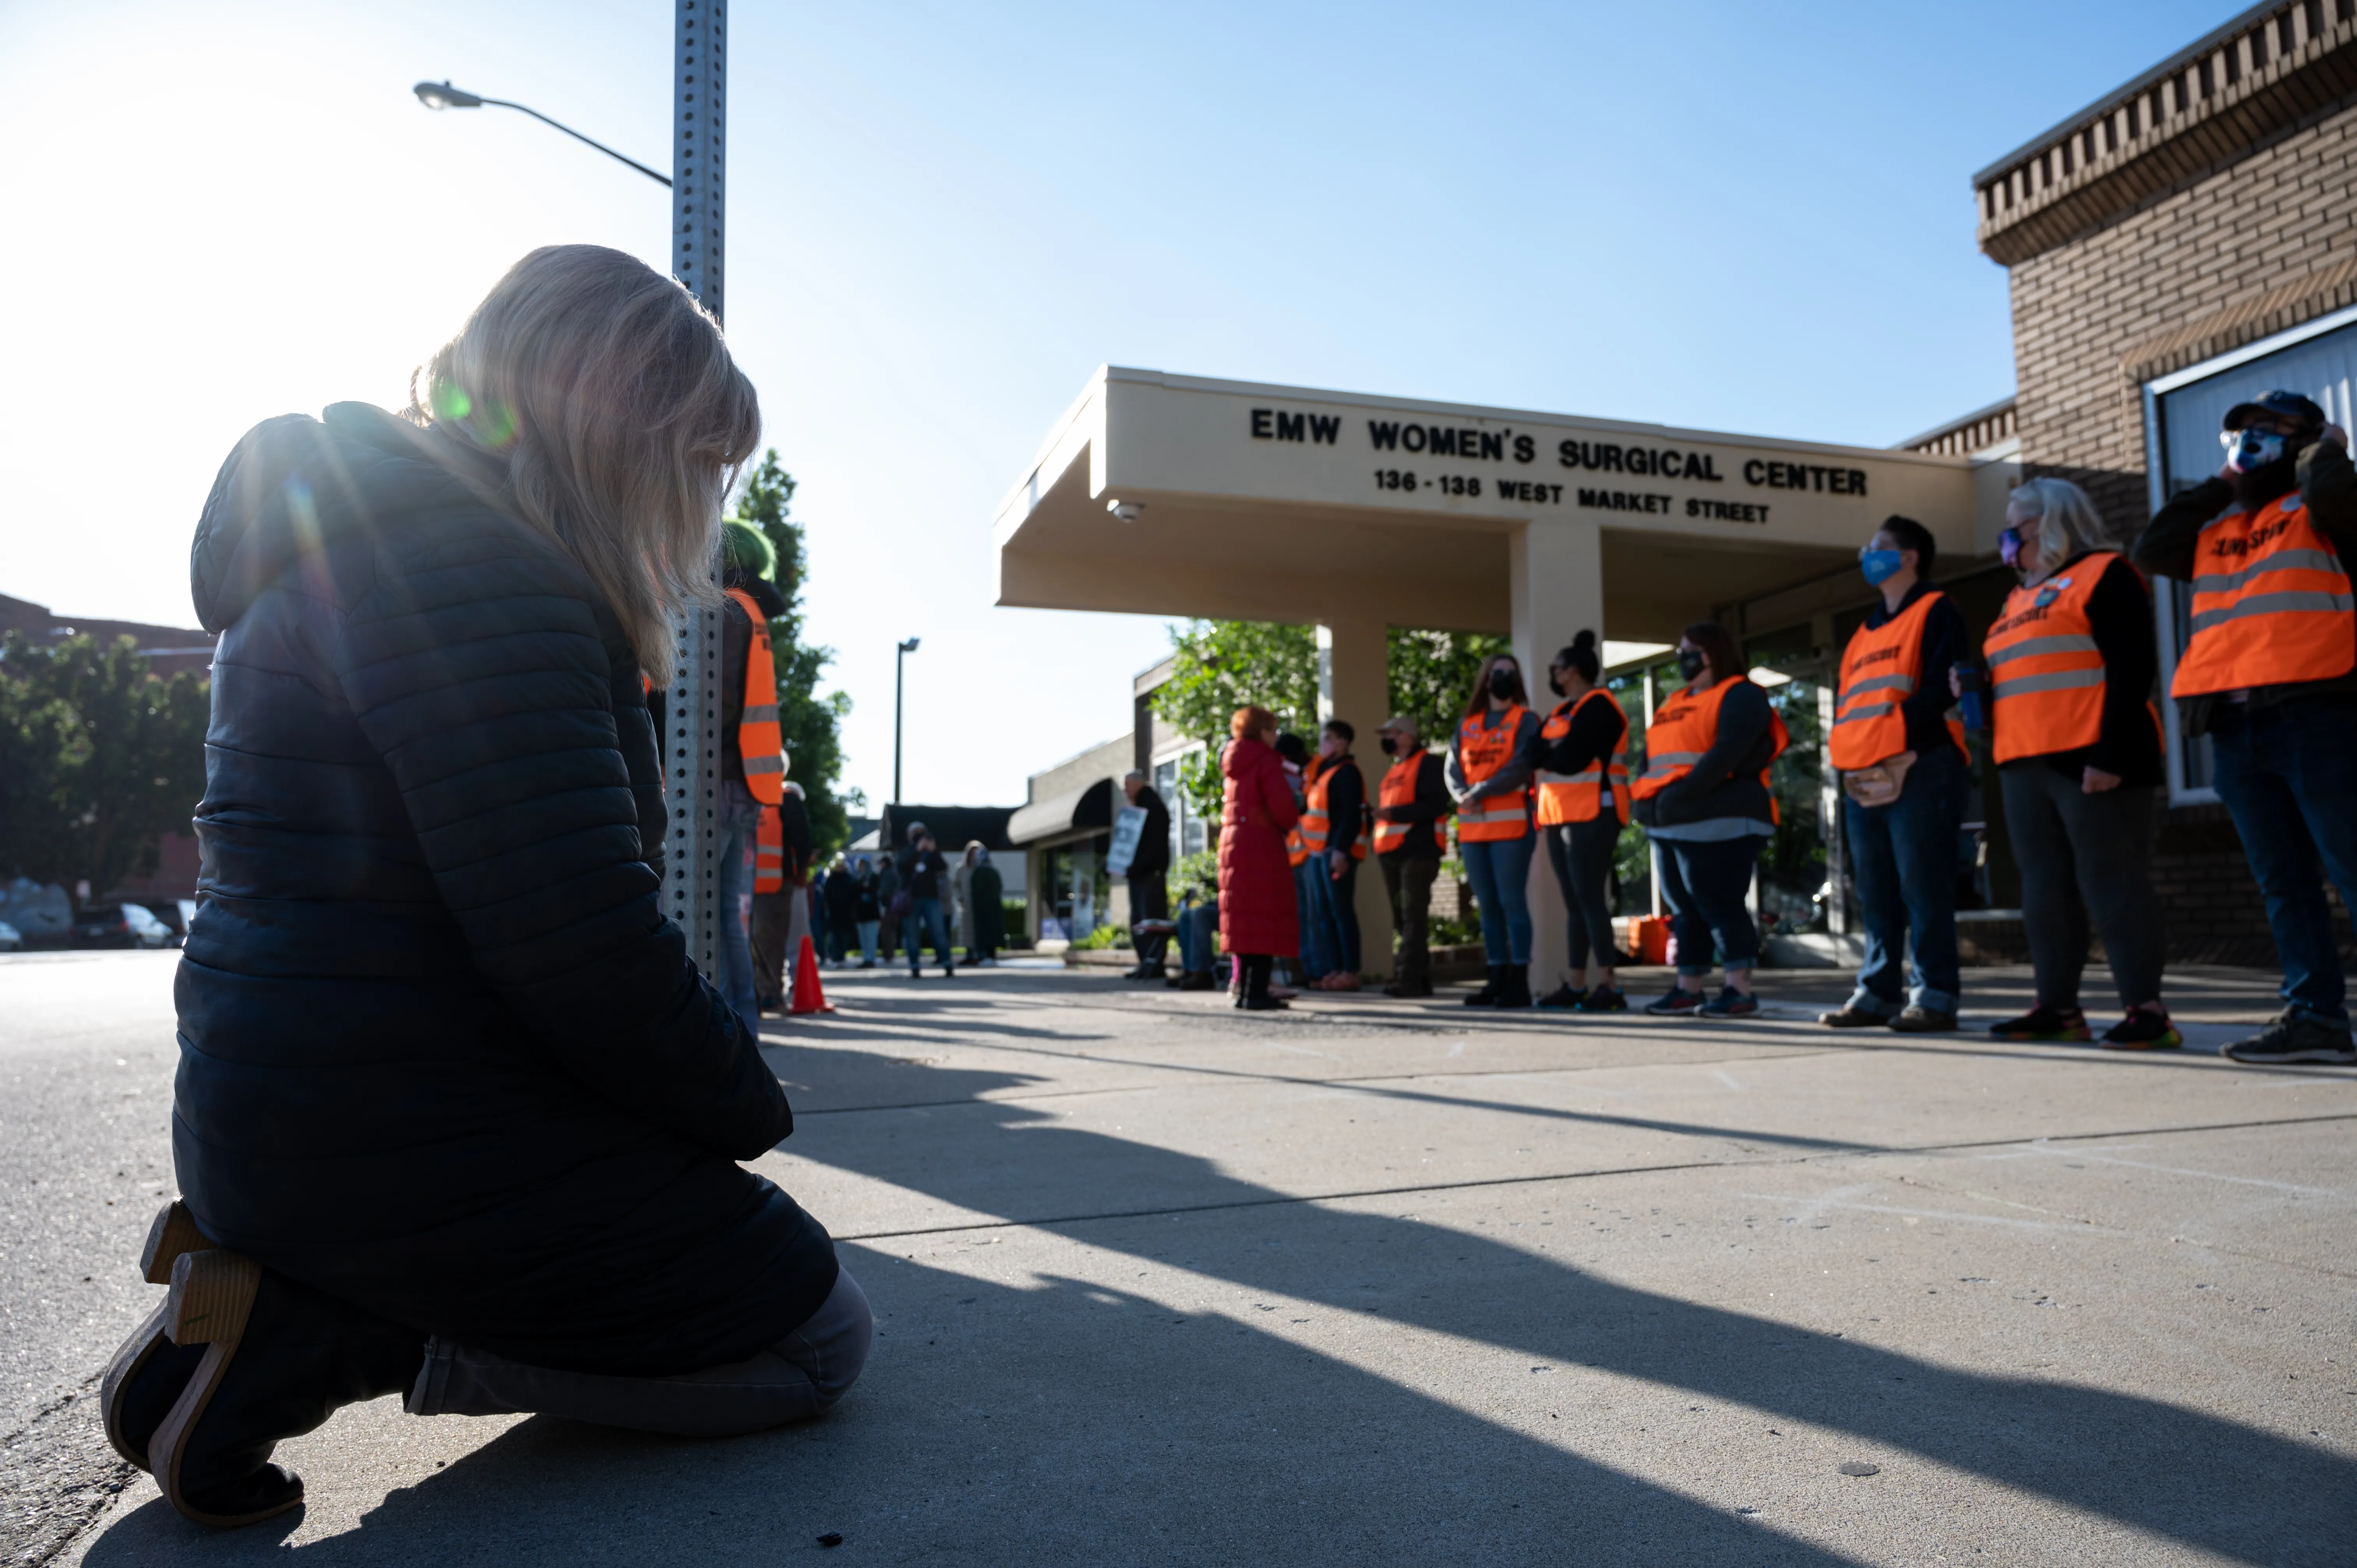 A pro-life woman kneels in prayer in front of the EMW Women's Surgical Center, an abortion clinic, in Louisville, Kentucky, on May 8, 2021.?w=200&h=150